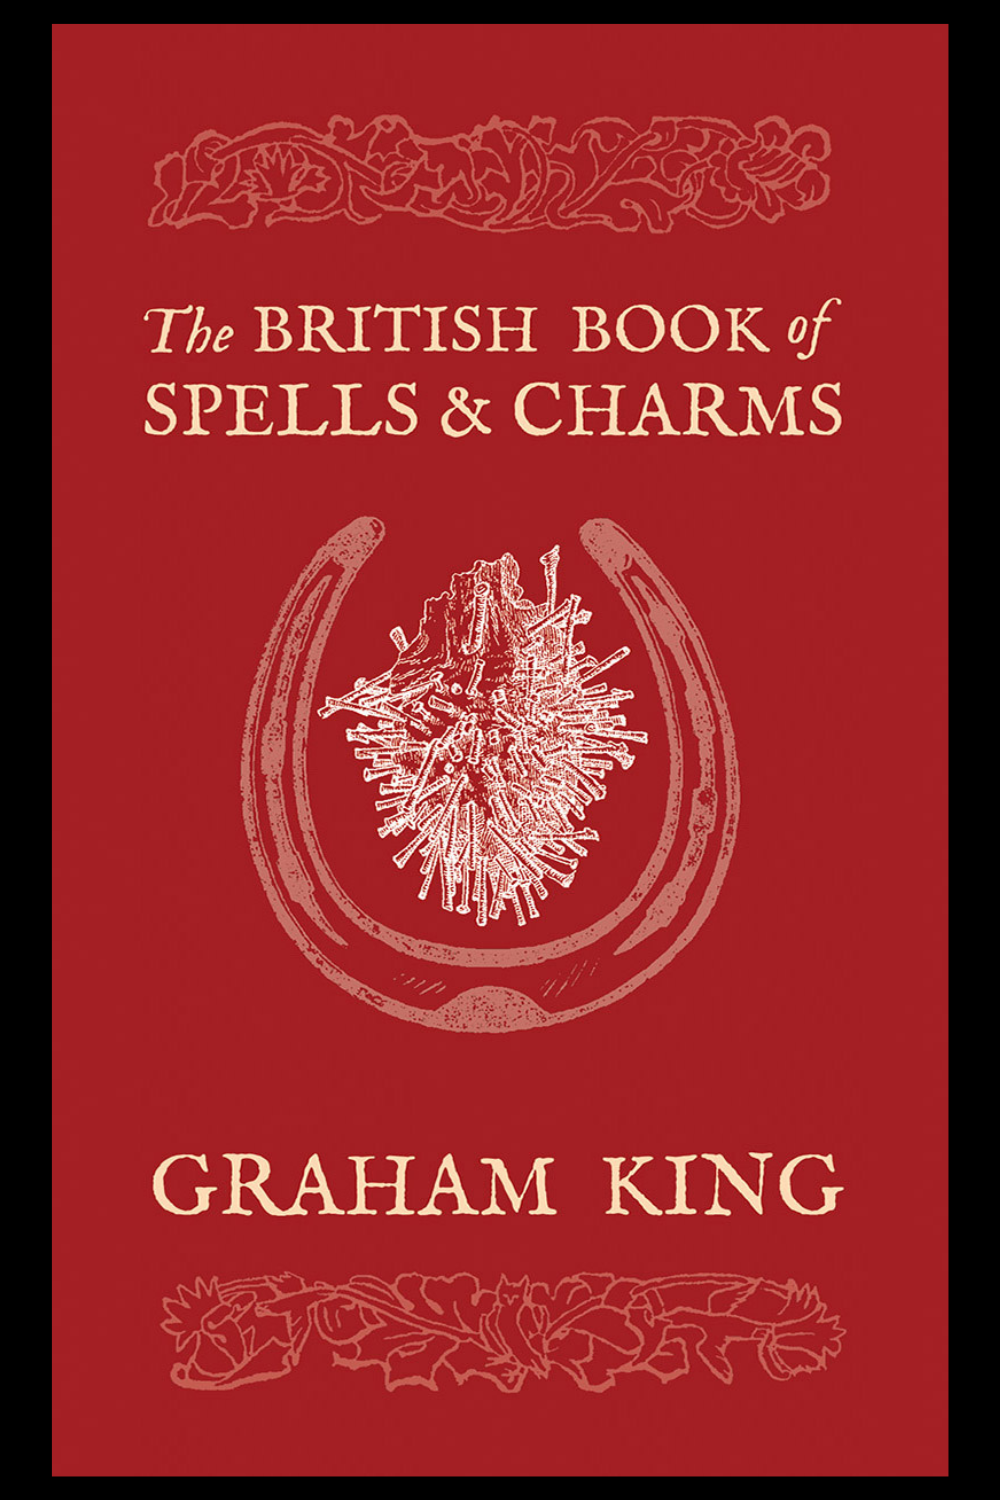 The British Book of Spells and Charms: A Compilation of Traditional Folk Magic by Graham King (Colour Paperback Edition)